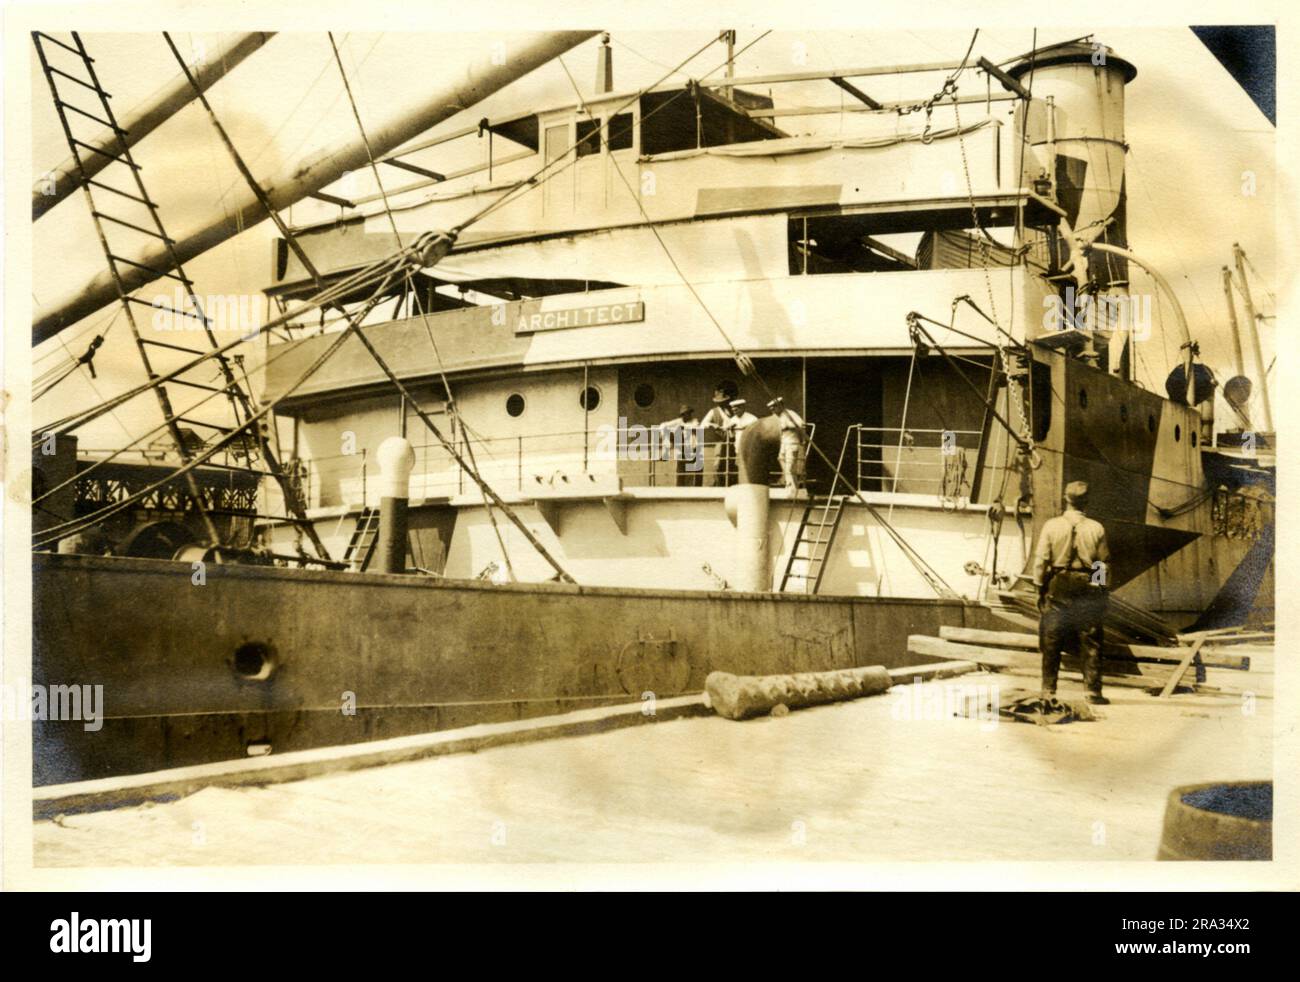 Photograph of the Fore Side of the Bridge of the SS Architect. Photograph Of Fore Side Of Bridge. Date: - July 29, 1918. Photograph Of; - S. S. Architect. Nationality: - British. Tonnage: -6736. Captain: - W. N. Rushforth. Owners: - T. & J. Harrison. Where From: - Plymouth, Eng. Destination: - Liverpool, Eng. Bordeux Bordeaux, France.? Where Photographed: - Savannah, GA. Sixth Naval District. By Whom Photographed: - J. B. Dearborn. Date Photographed: - July 12th., 1918. Where Camouflaged: - West Hartlepool, Eng. Date: - June 7th., 1918. By Whom: - Gray Shipbuilding Co. Type Of Ship: - Well Dec Stock Photo